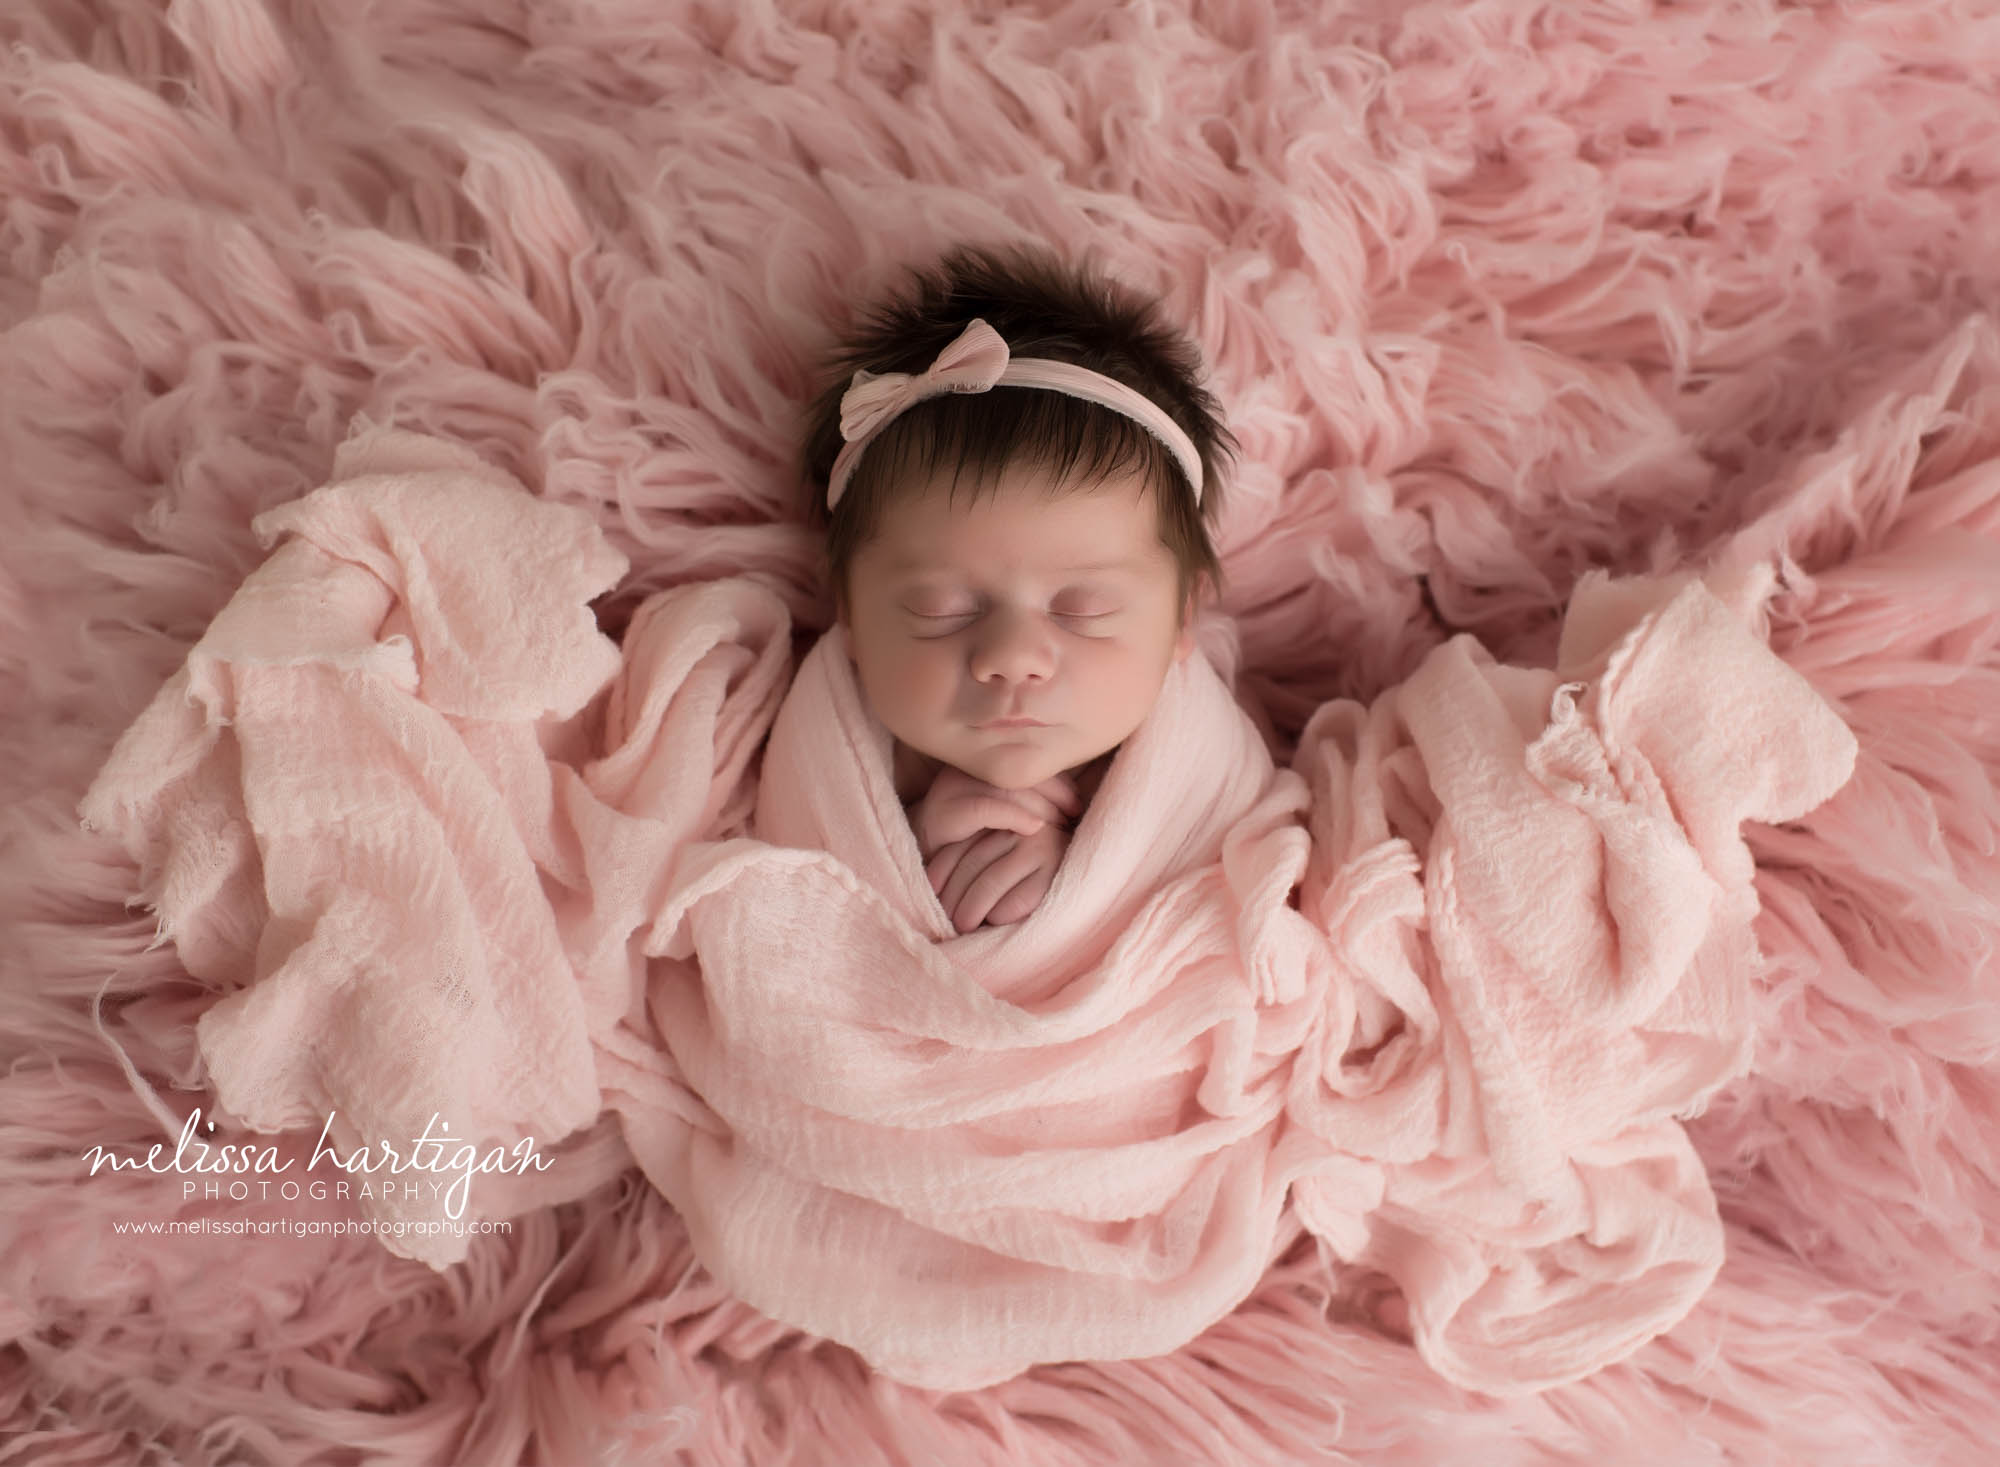 newborn baby girl wrapped in pink wrap pose don pink flokati wearing pink bow headband tolland county CT newborn photographer